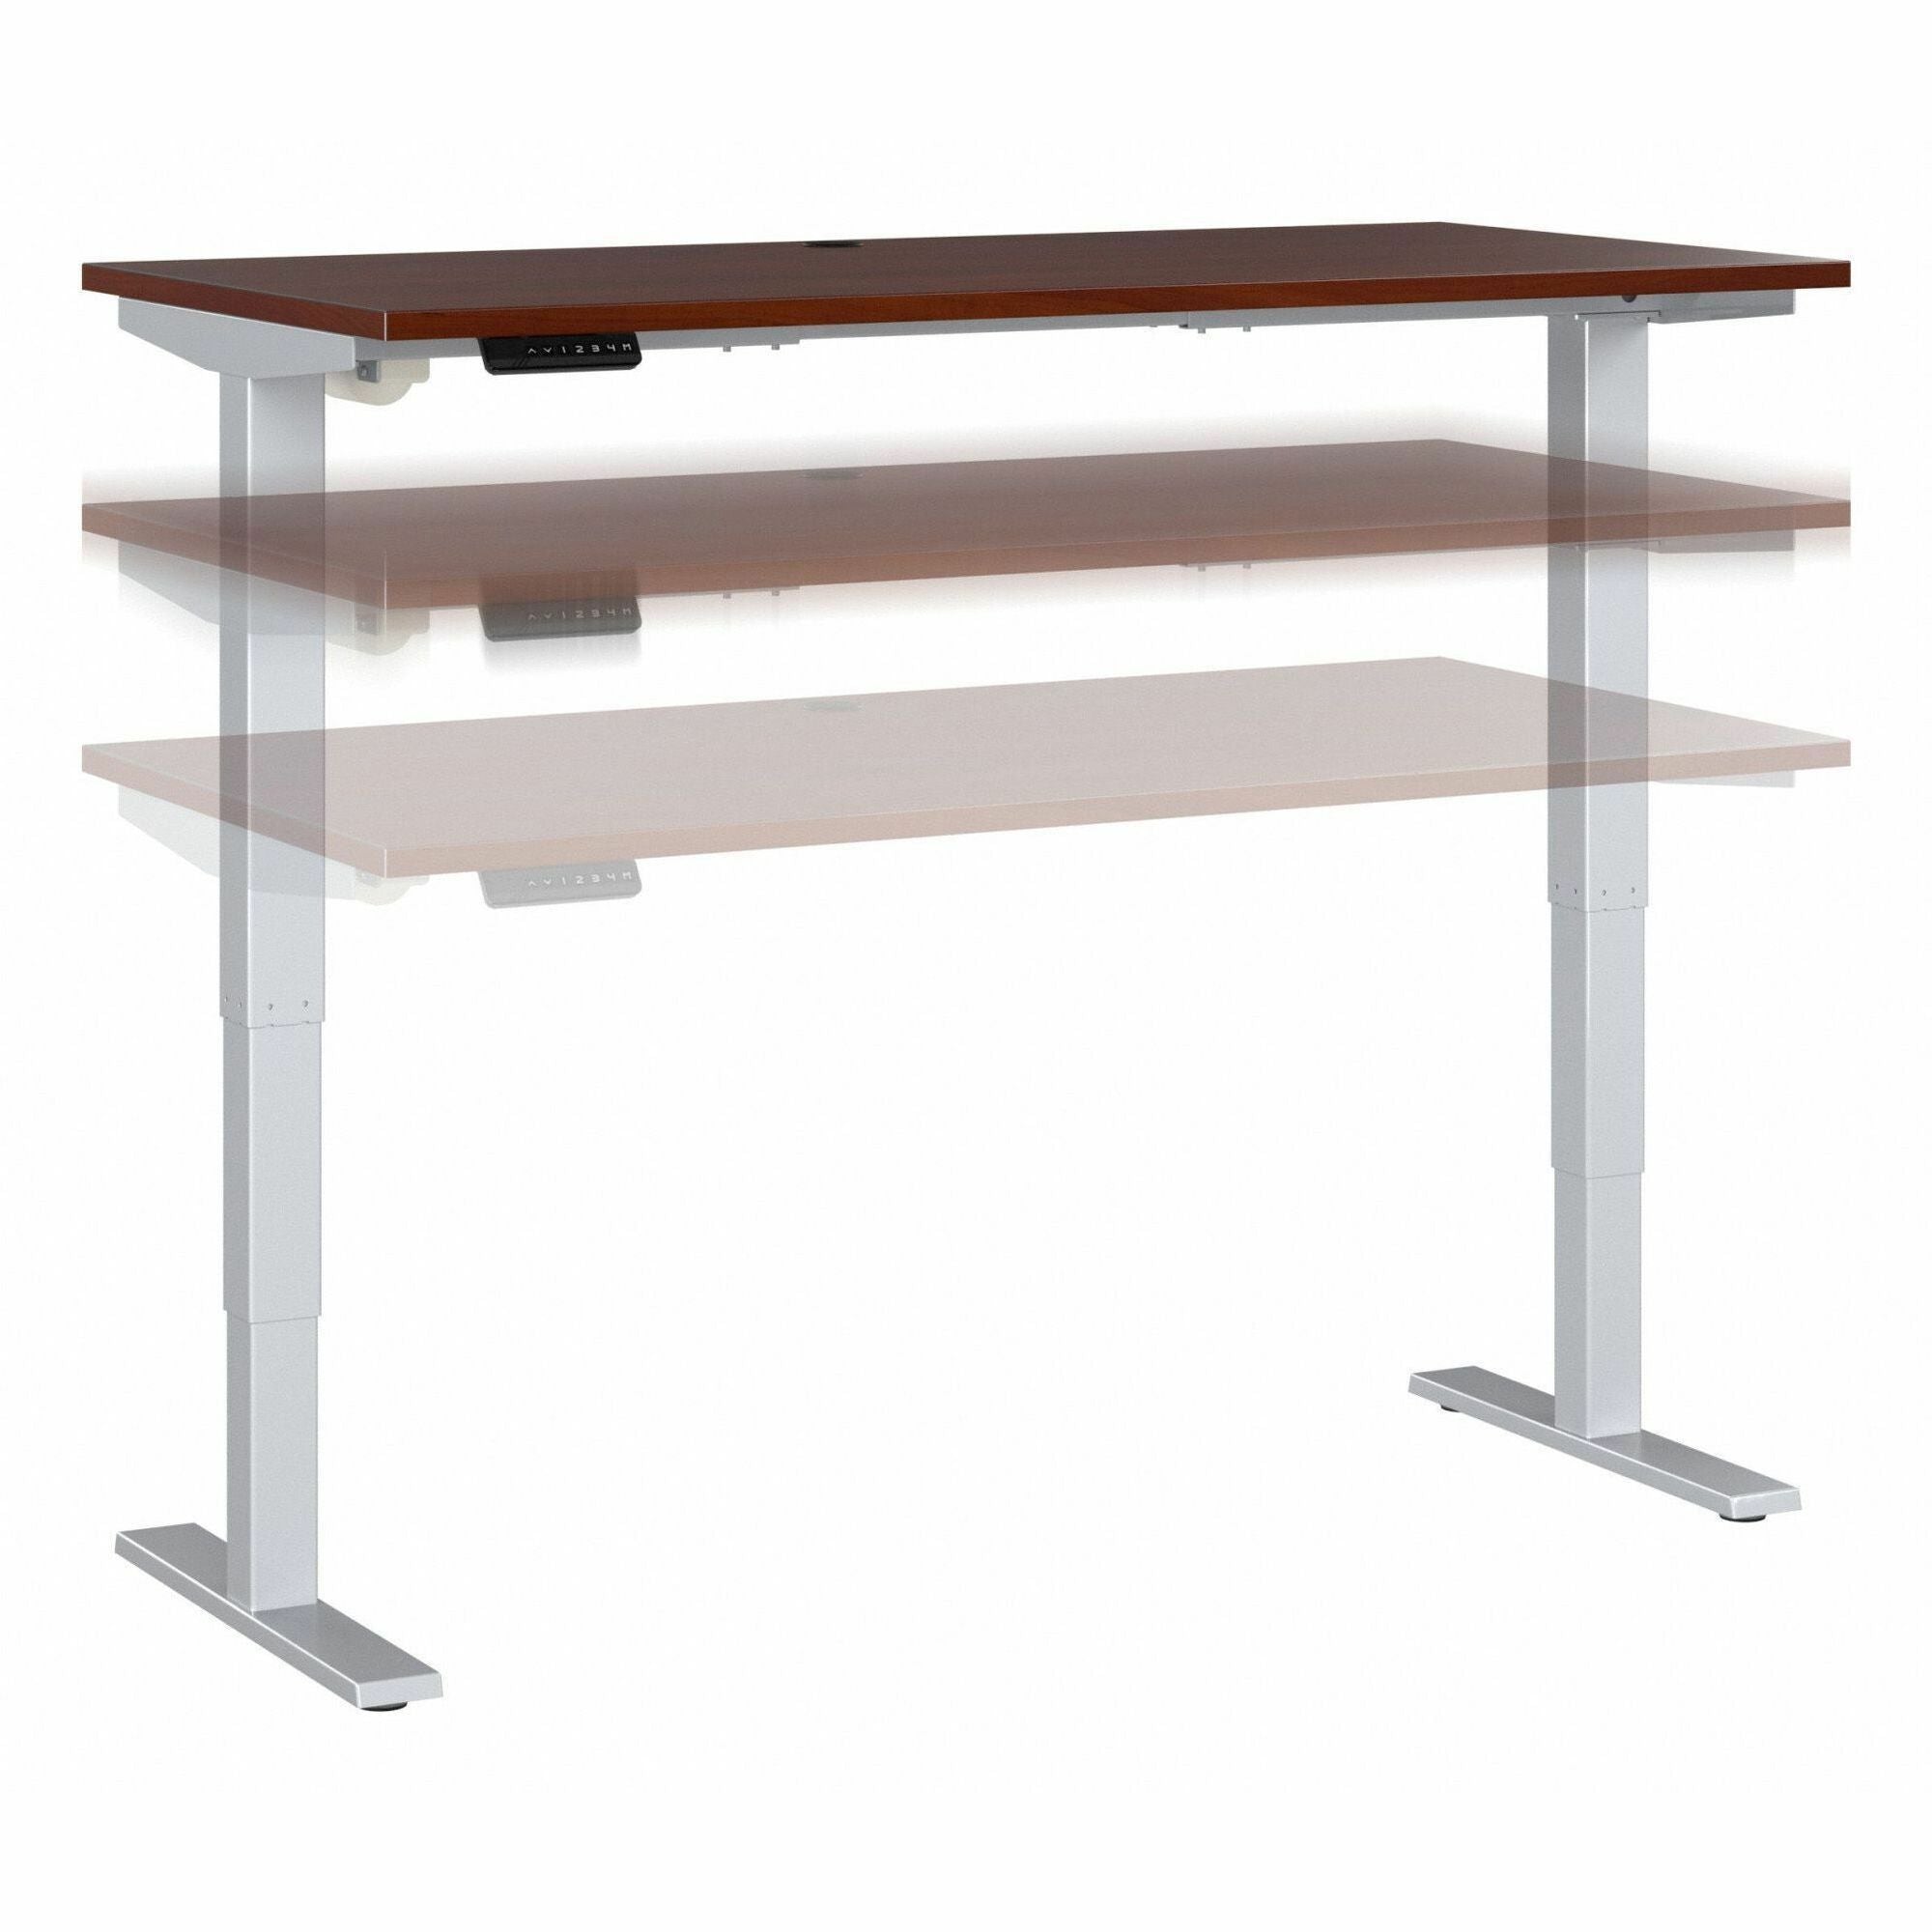 Bush Business Furniture Move 40 Series 60w X 30d Electric Height Adjustable Standing Desk - For - Table TopHansen Cherry Rectangle Top - Silver T-shaped Base - 176 lb Capacity - Adjustable Height - 28.17" to 48.24" Adjustment x 59.45" Table Top Width - 1